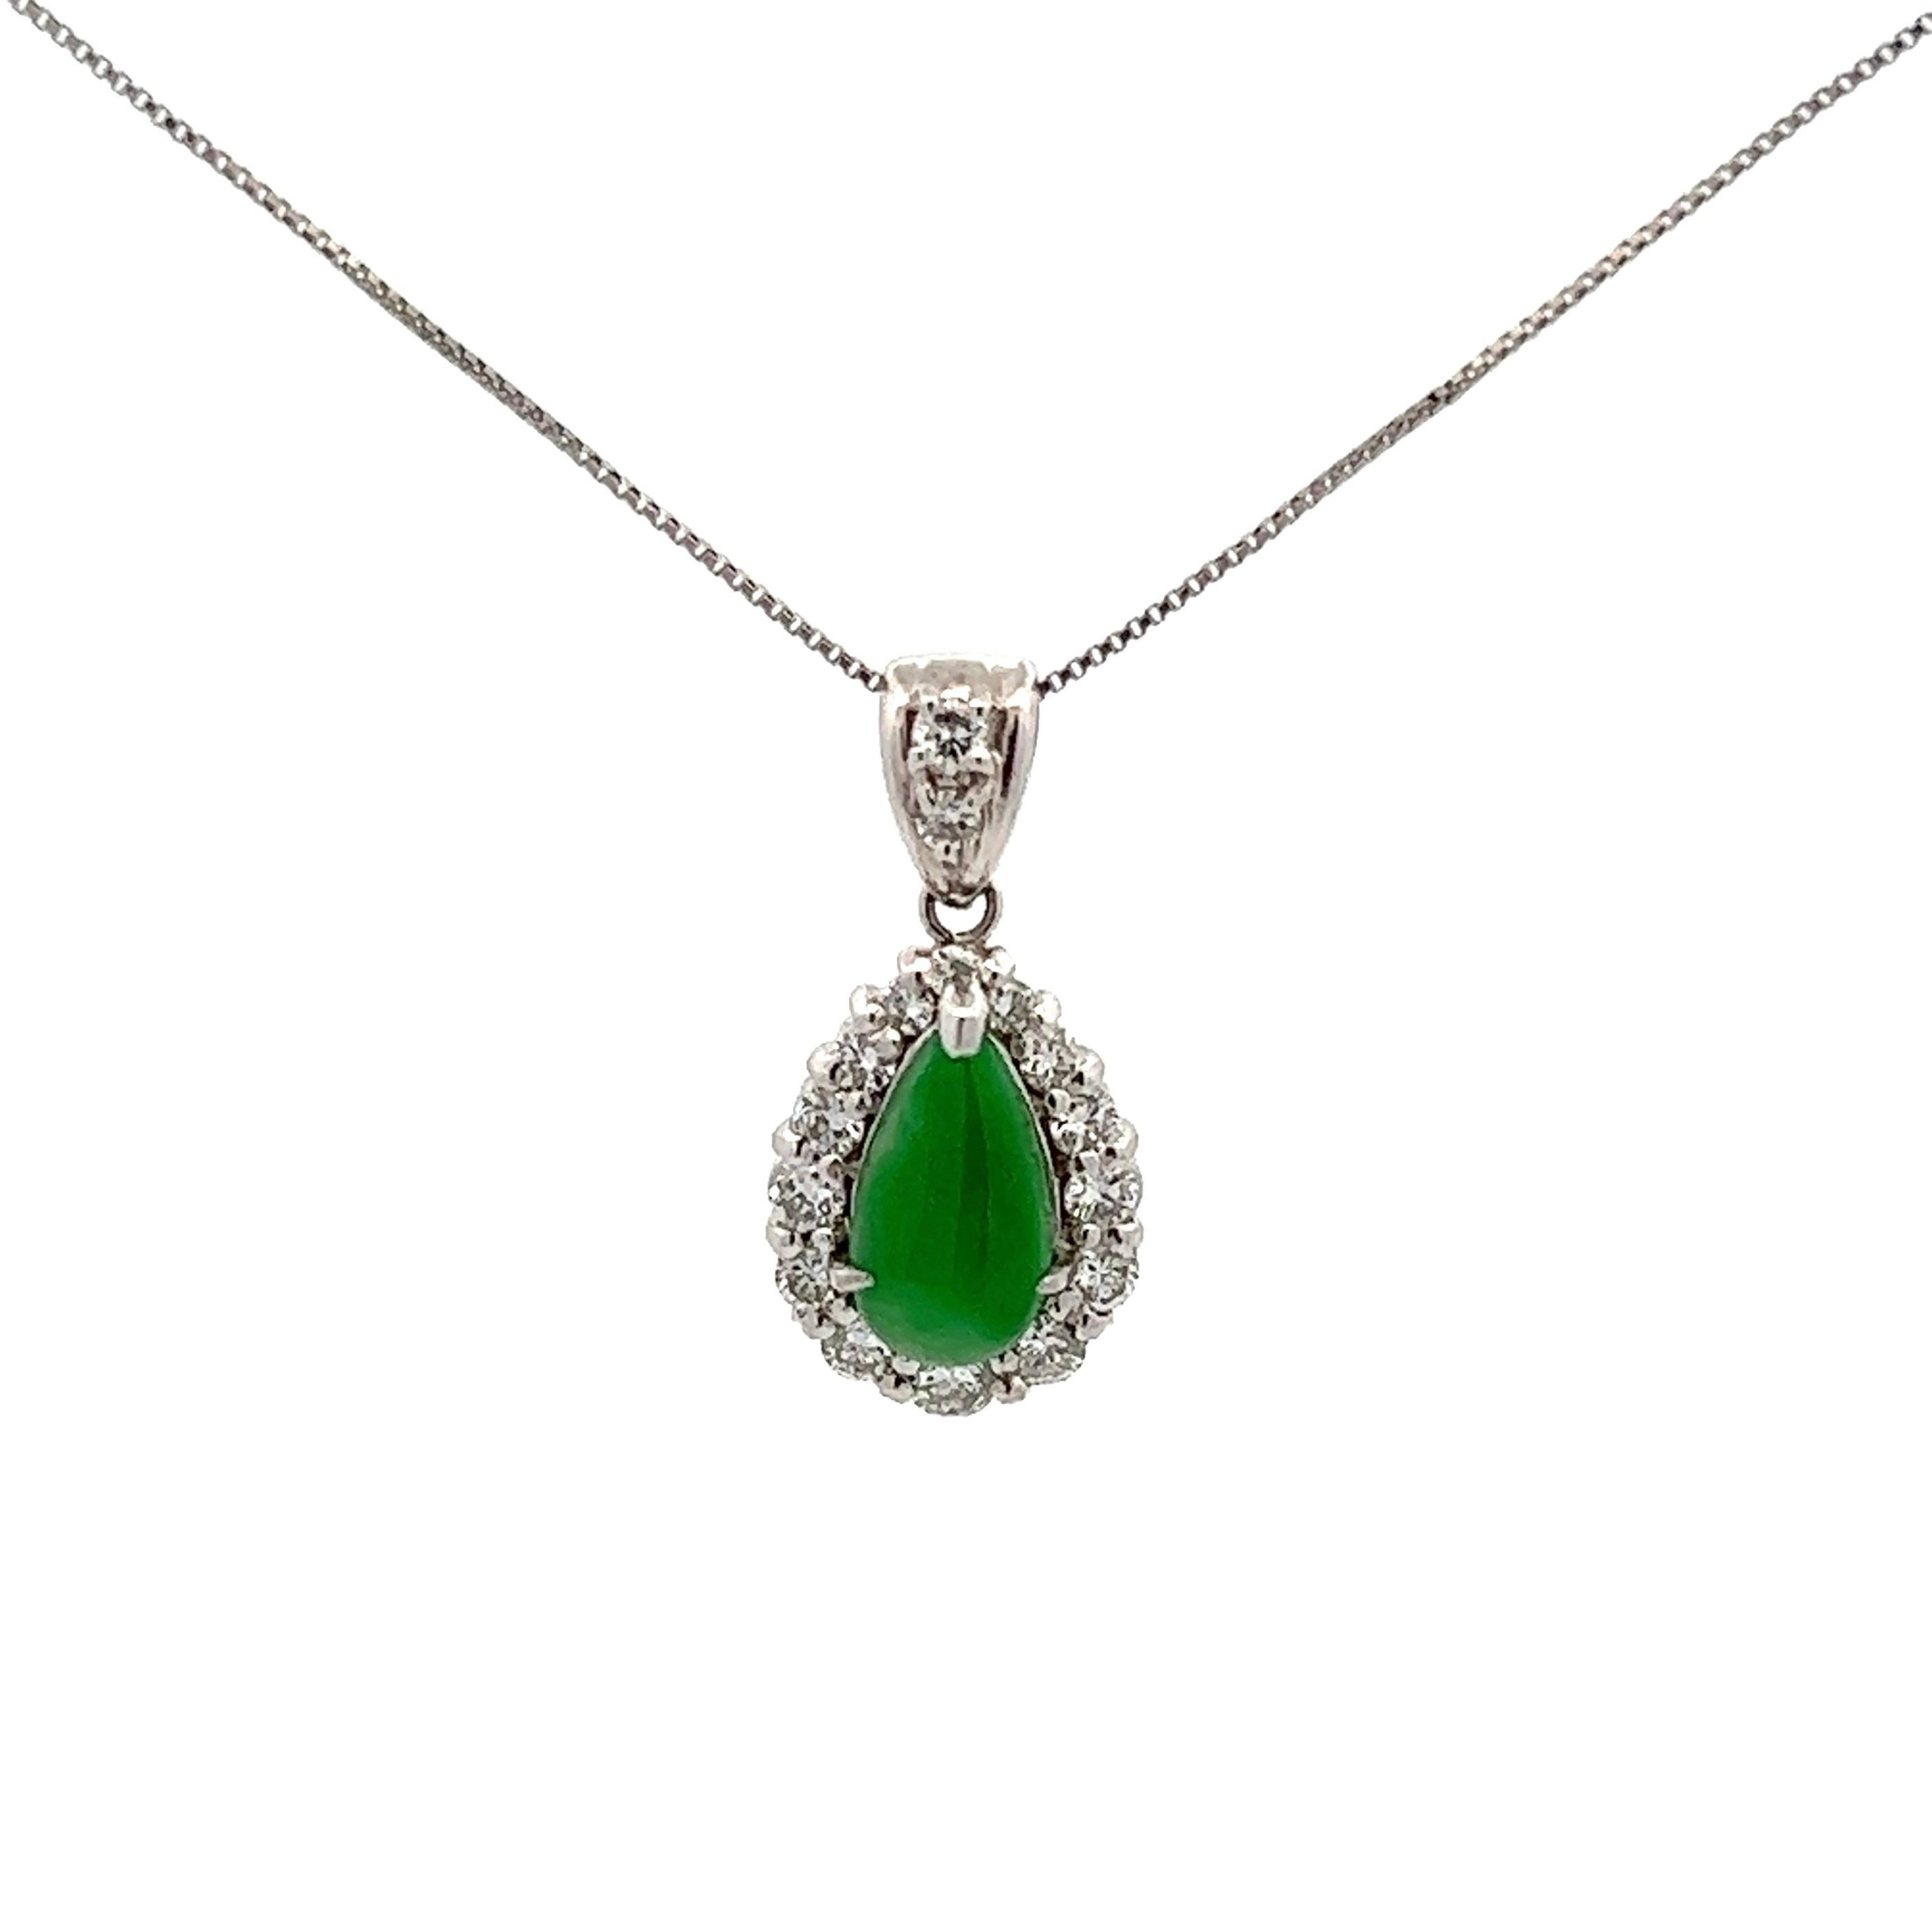 Simply Beautiful! Jadeite Jade Grade A Pear shape weighing approx. 1.21 Carat GIA # 6224572955, surrounded by Diamonds, weighing approx. 0.51tcw. Suspended from a 16